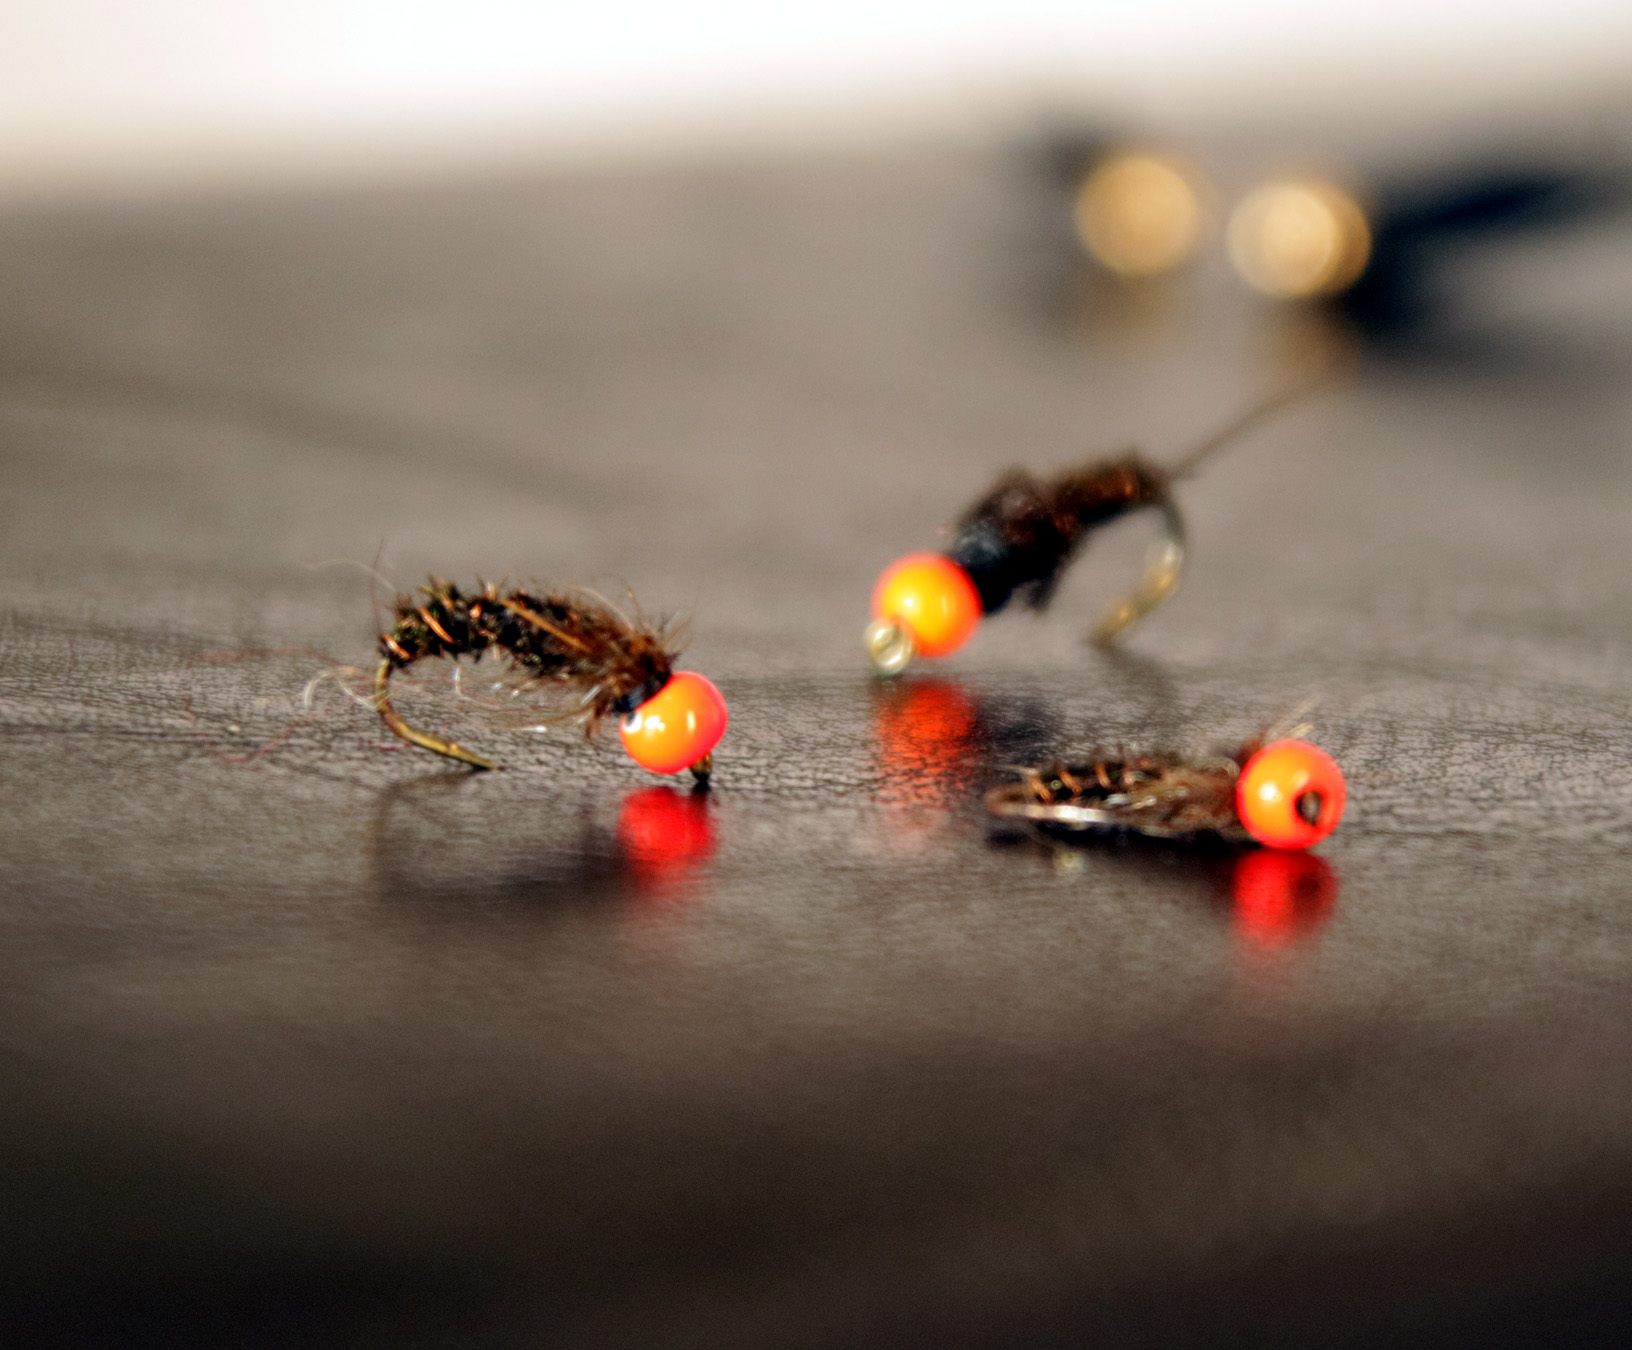 Types of nymphs to select when fly-fishing with nymphs